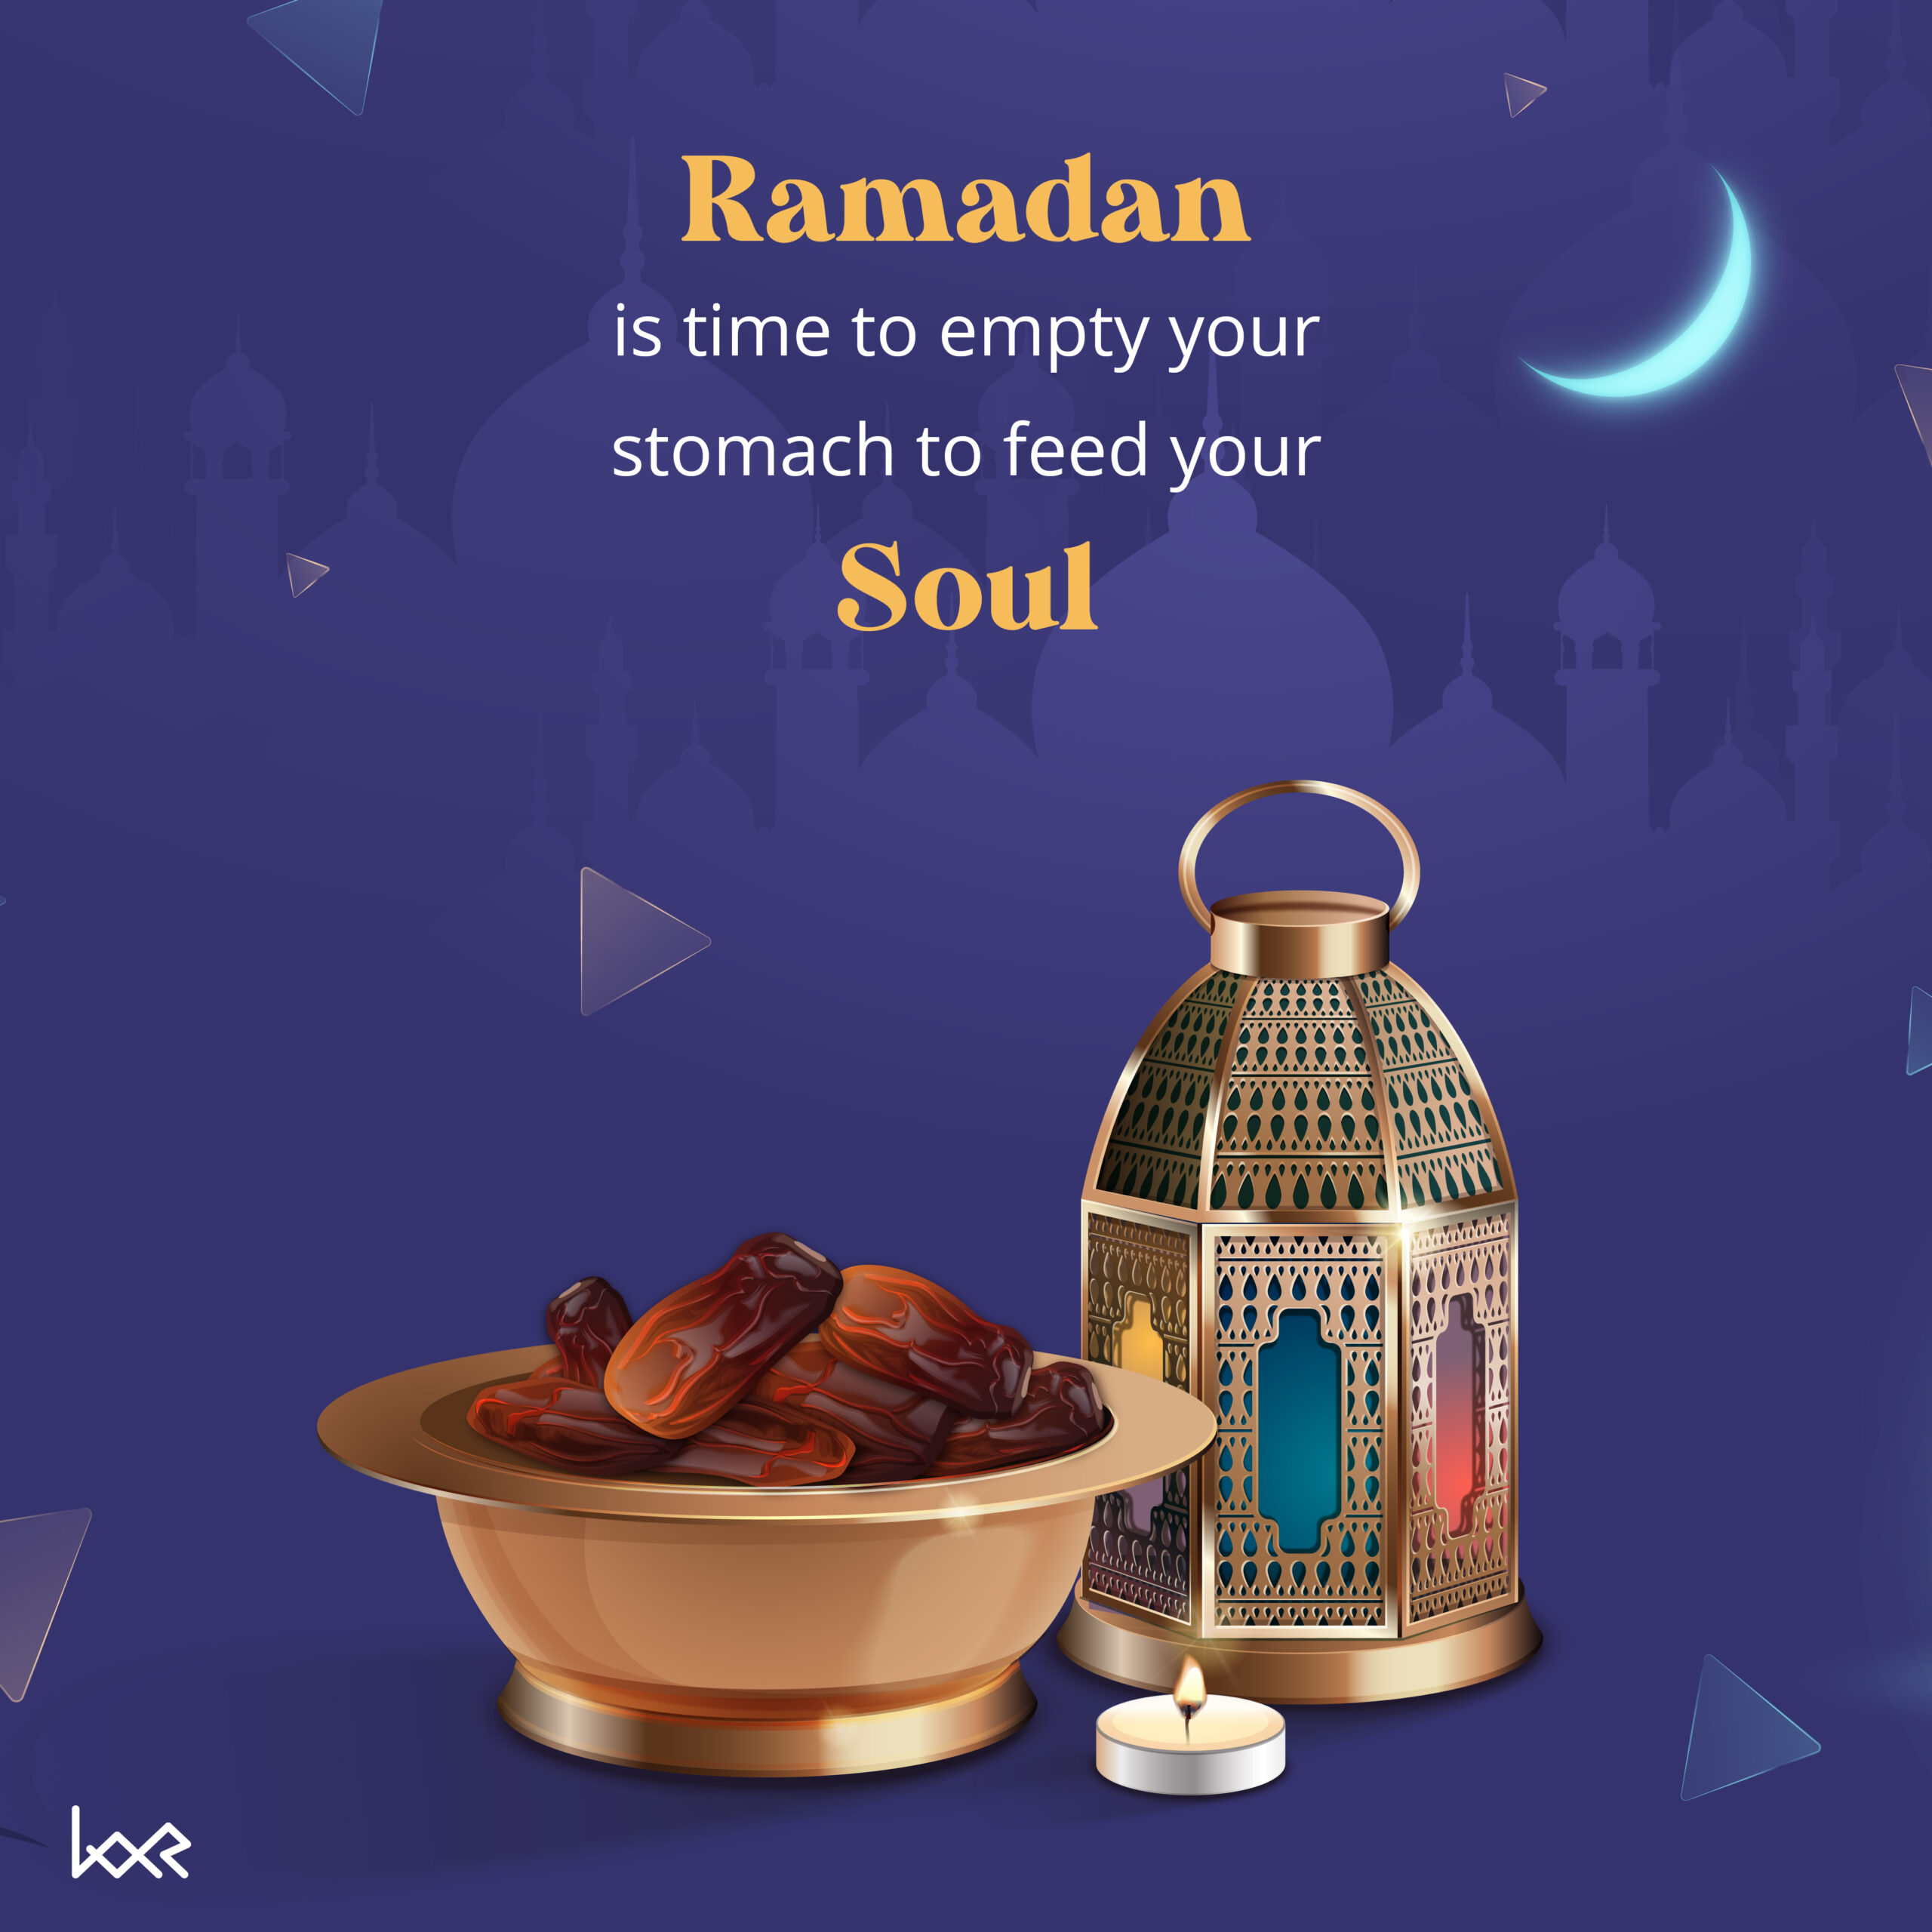 Ramadan the best time of giving